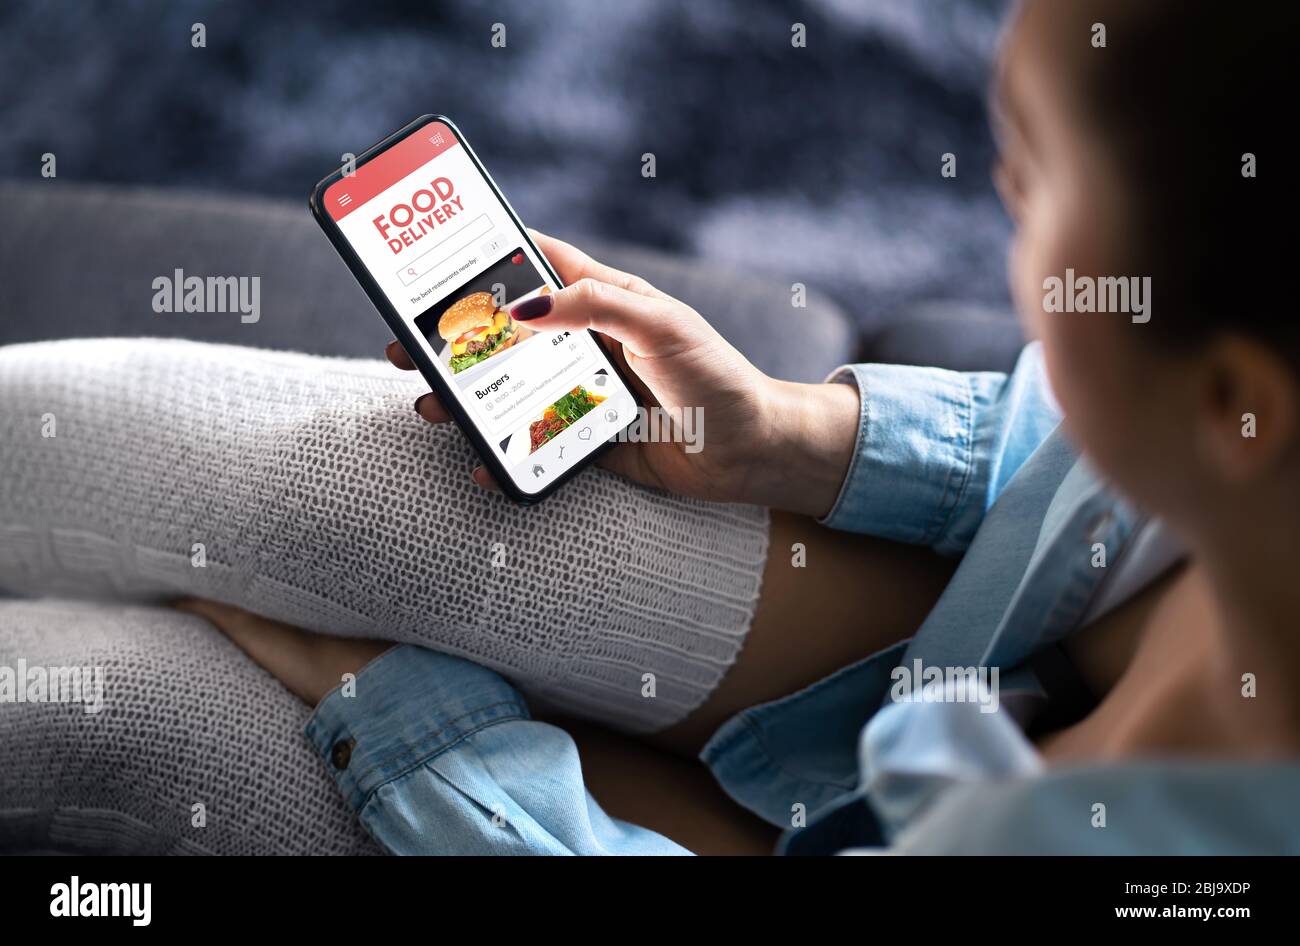 Food delivery app in mobile phone. Restaurant order online. Woman using smartphone to get take away lunch home delivered. Fast courier service. Stock Photo